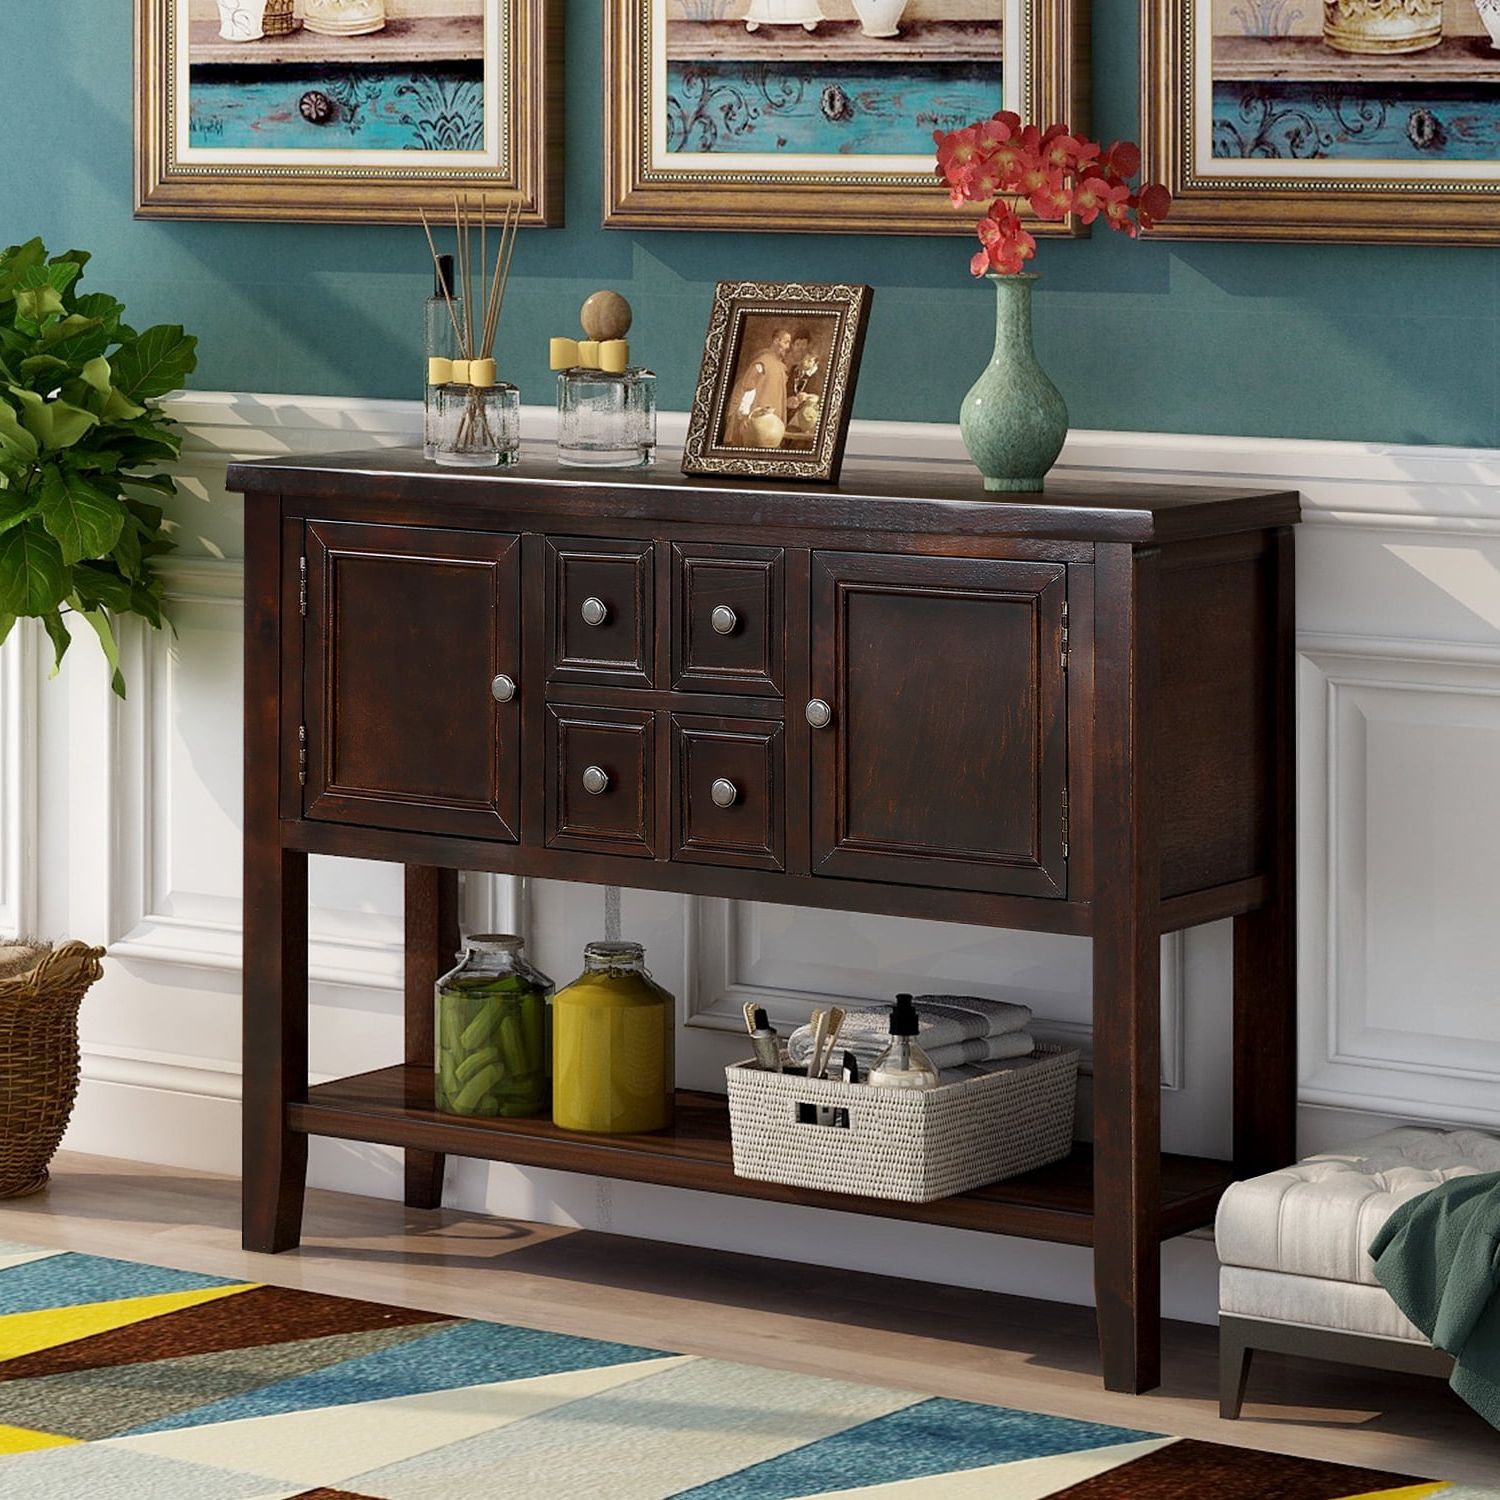 Storage Cabinet Sideboards Intended For Well Liked Sideboards And Buffets, 46" Buffet Cabinet Sideboard With 4 Storage Drawers  2 Cabinets And Bottom Shelf, Wood Console Table Storage Cabinet For Dining  Room Home Furniture, Espresso, L2432 – Walmart (View 5 of 15)